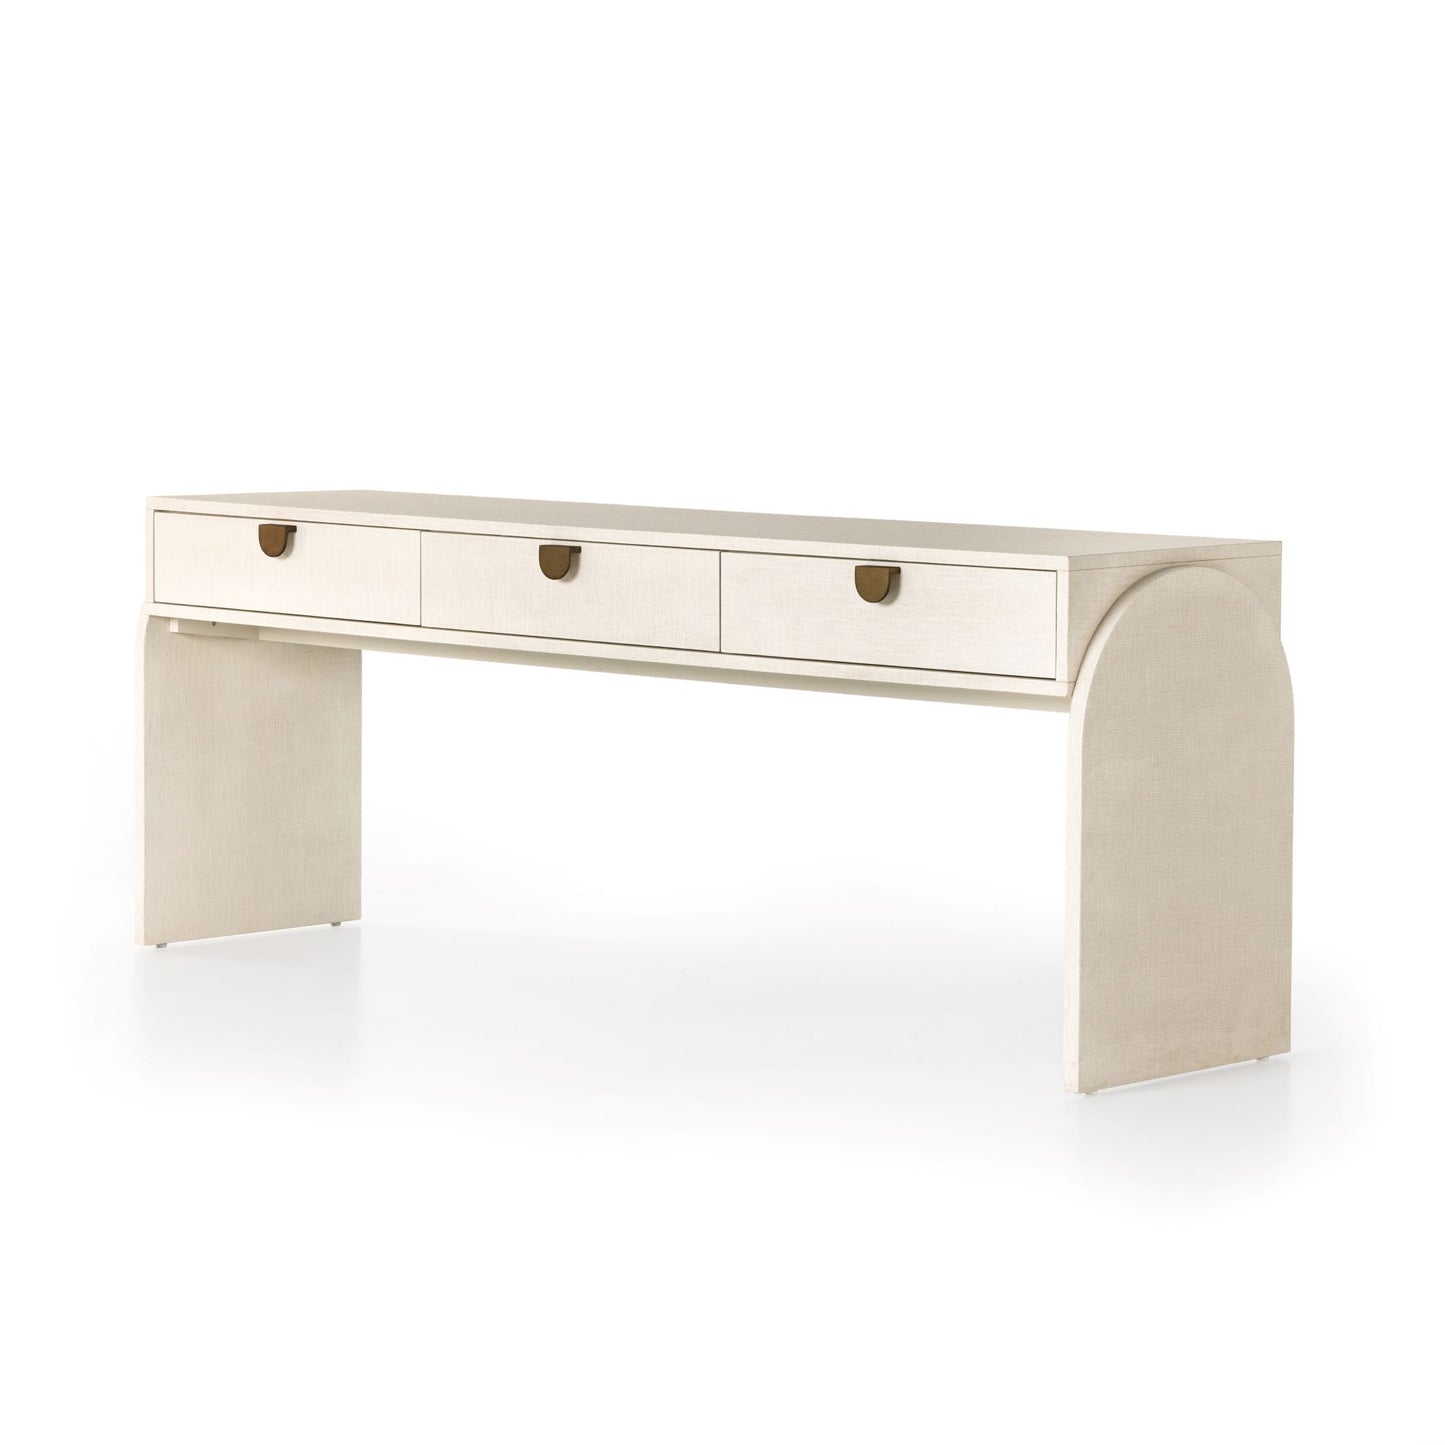 Cressida Console Table Console Table Four Hands     Four Hands, Mid Century Modern Furniture, Old Bones Furniture Company, Old Bones Co, Modern Mid Century, Designer Furniture, https://www.oldbonesco.com/